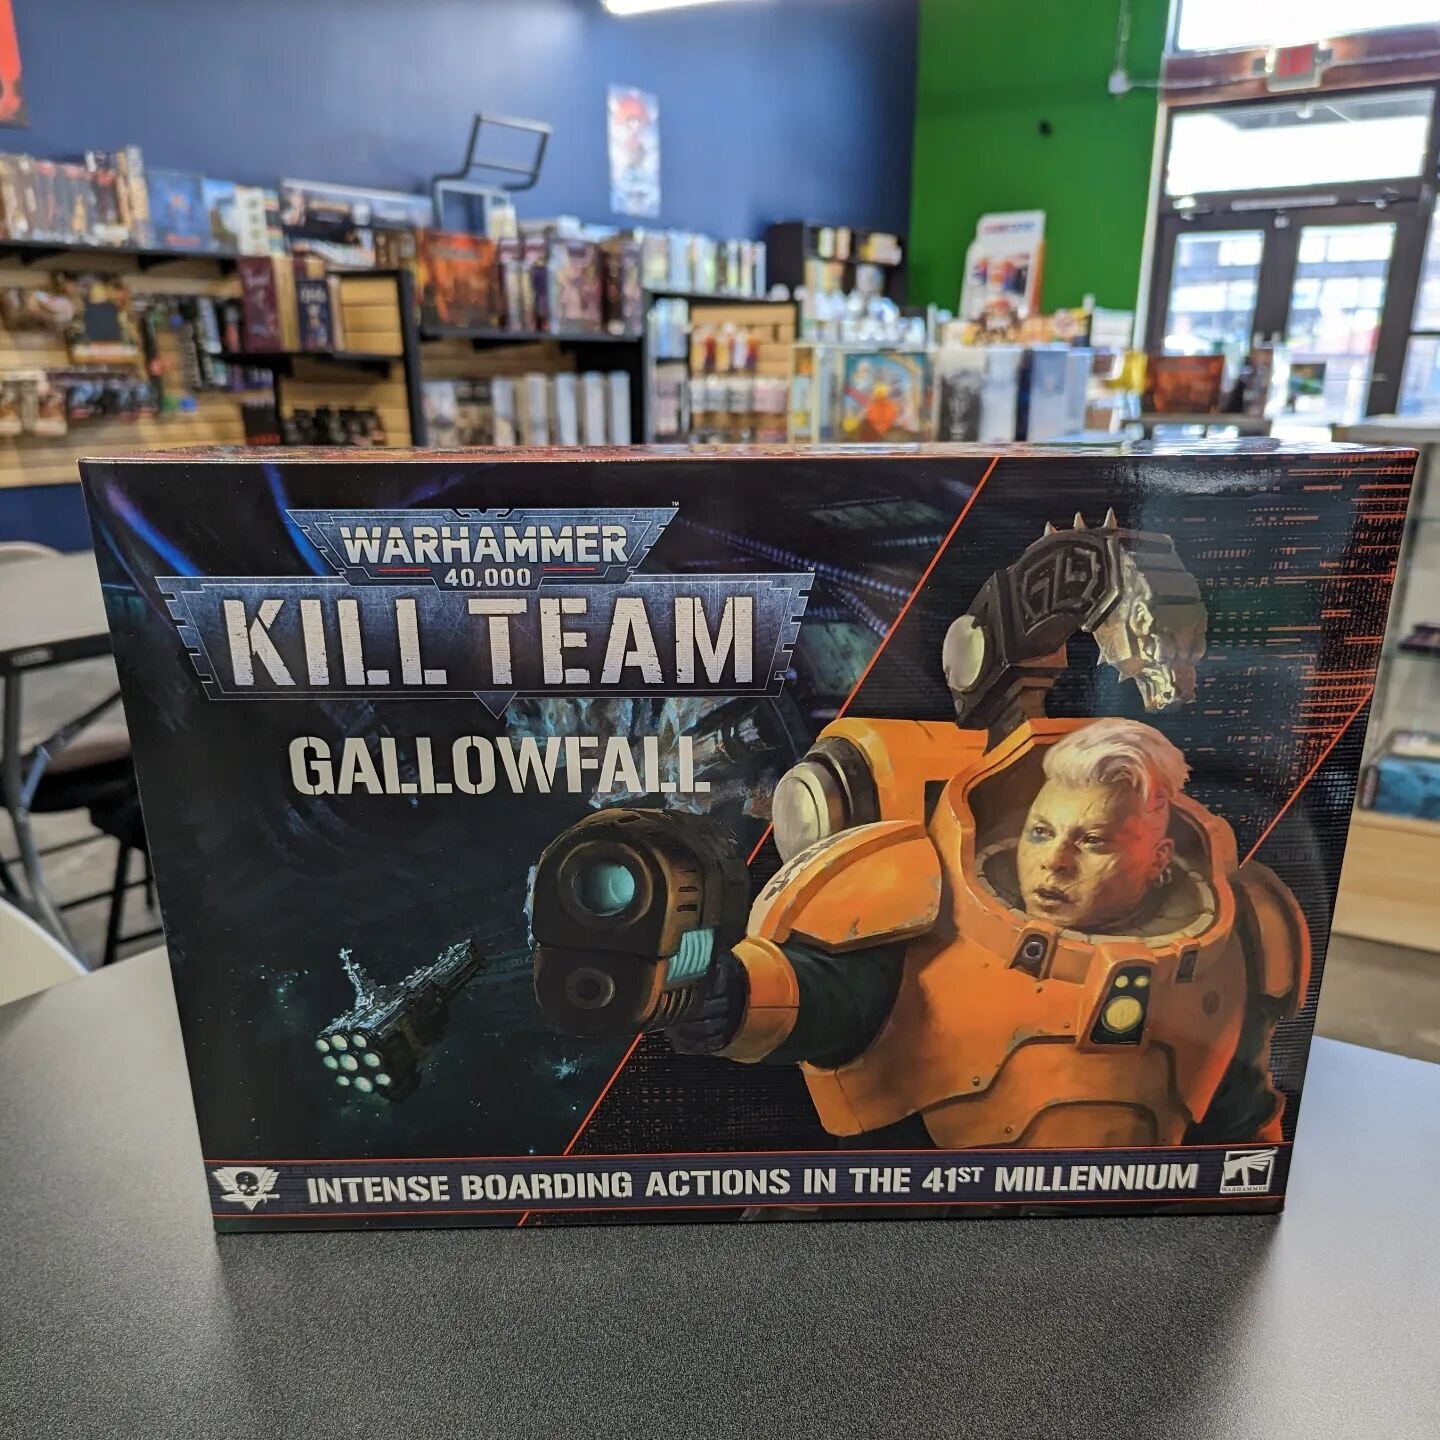 We have two copies of Kill Team: Gallowfall in stock! #wh40k #flgs #shoplocal